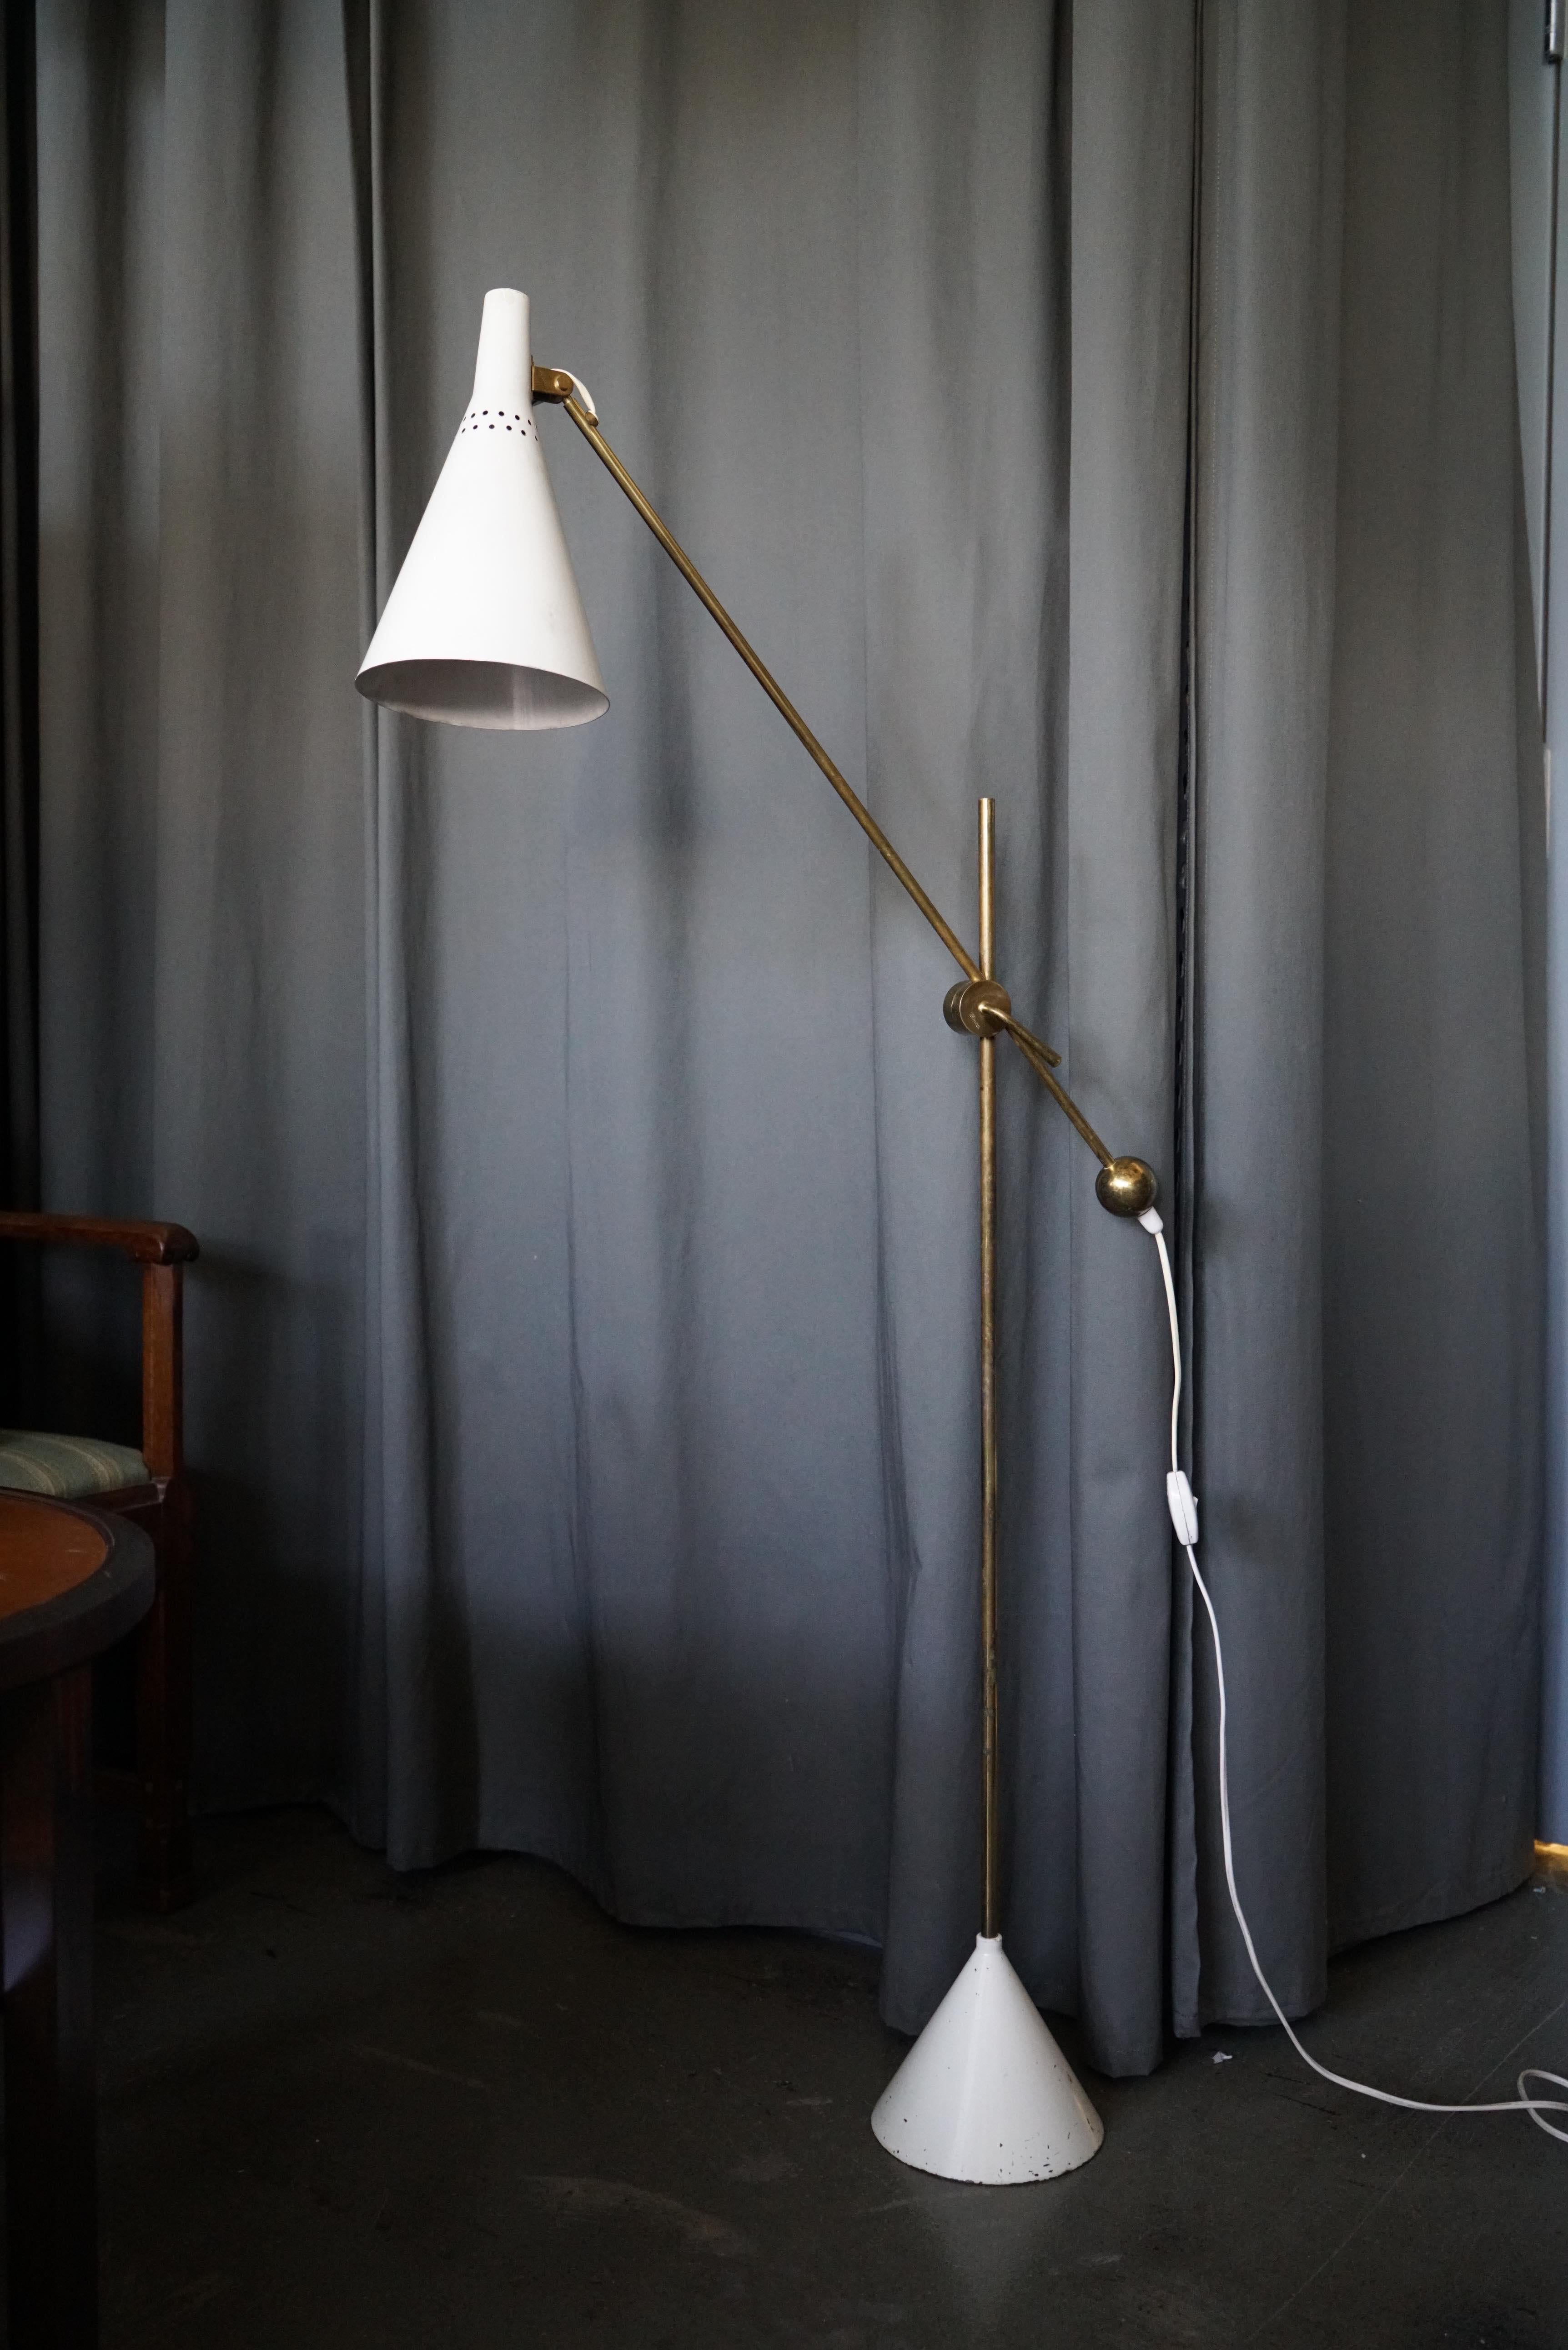 Floor Lamp “K10-11 ” designed by Tapio Wirkkala for Idman, Finland, circa 1950th. Rare, original lacquered finish on shade, patina on brass parts. Stamped 